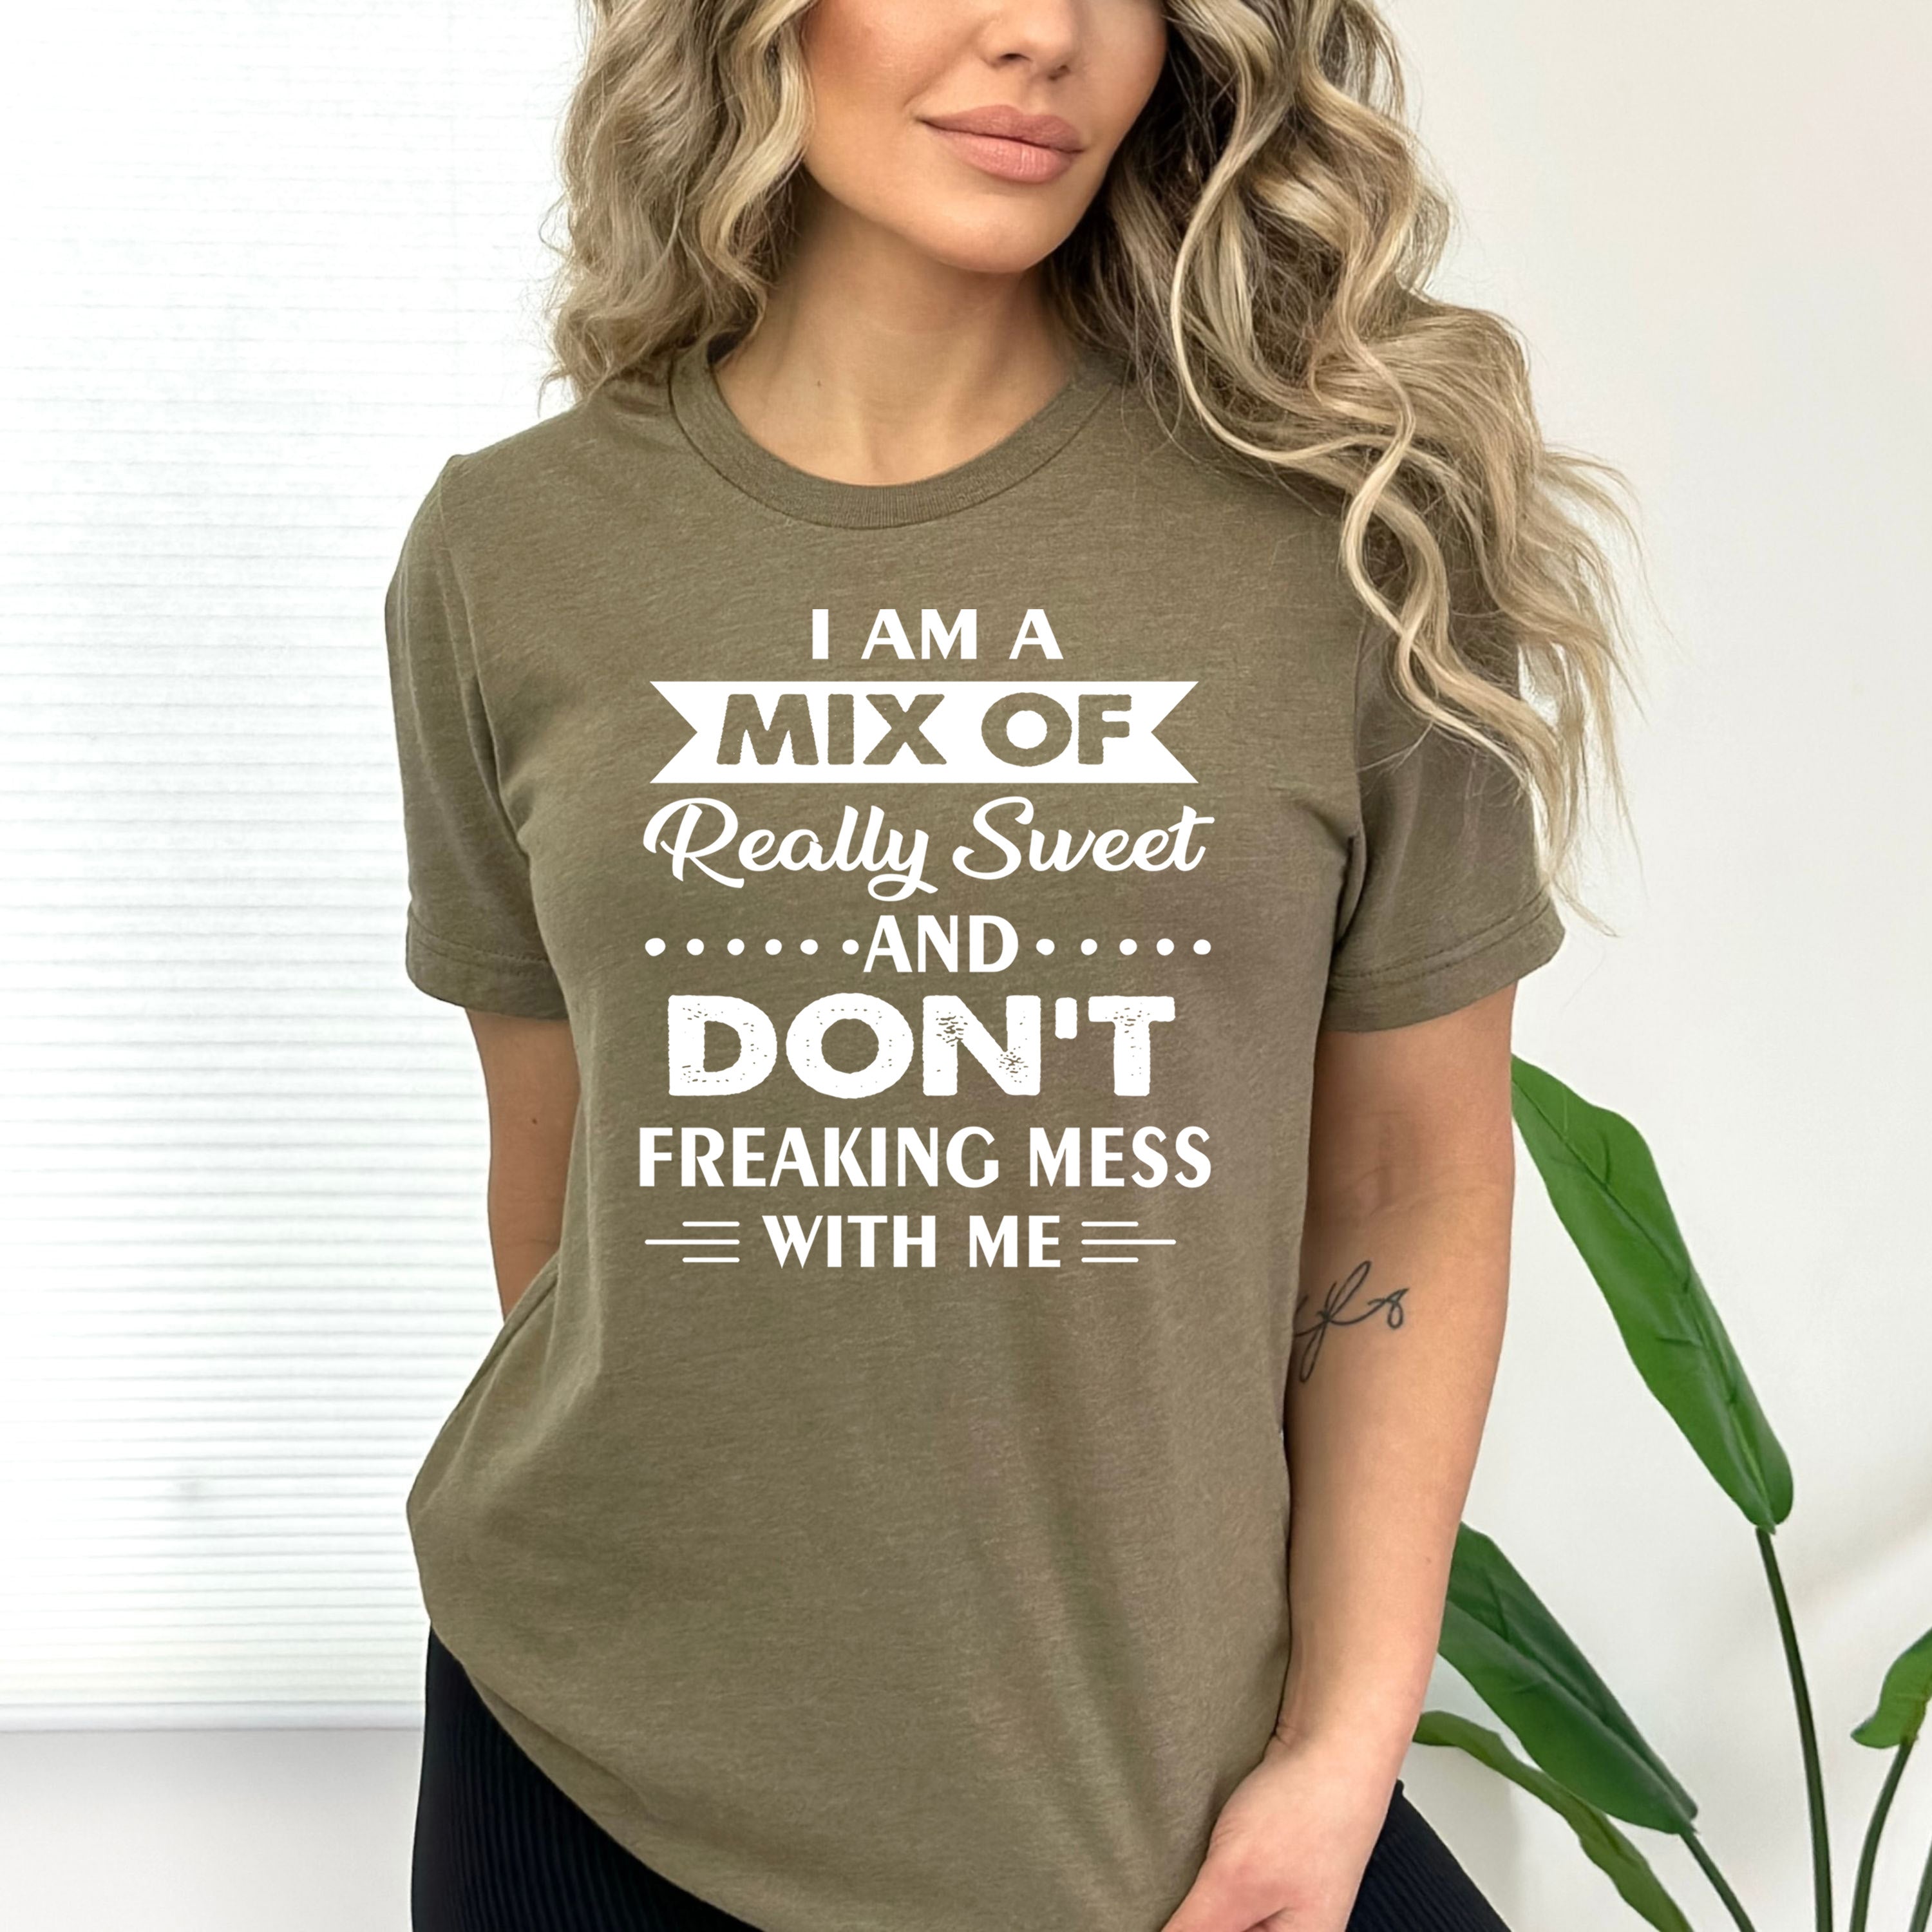 Don't Freaking Mess With Me - Bella canvas